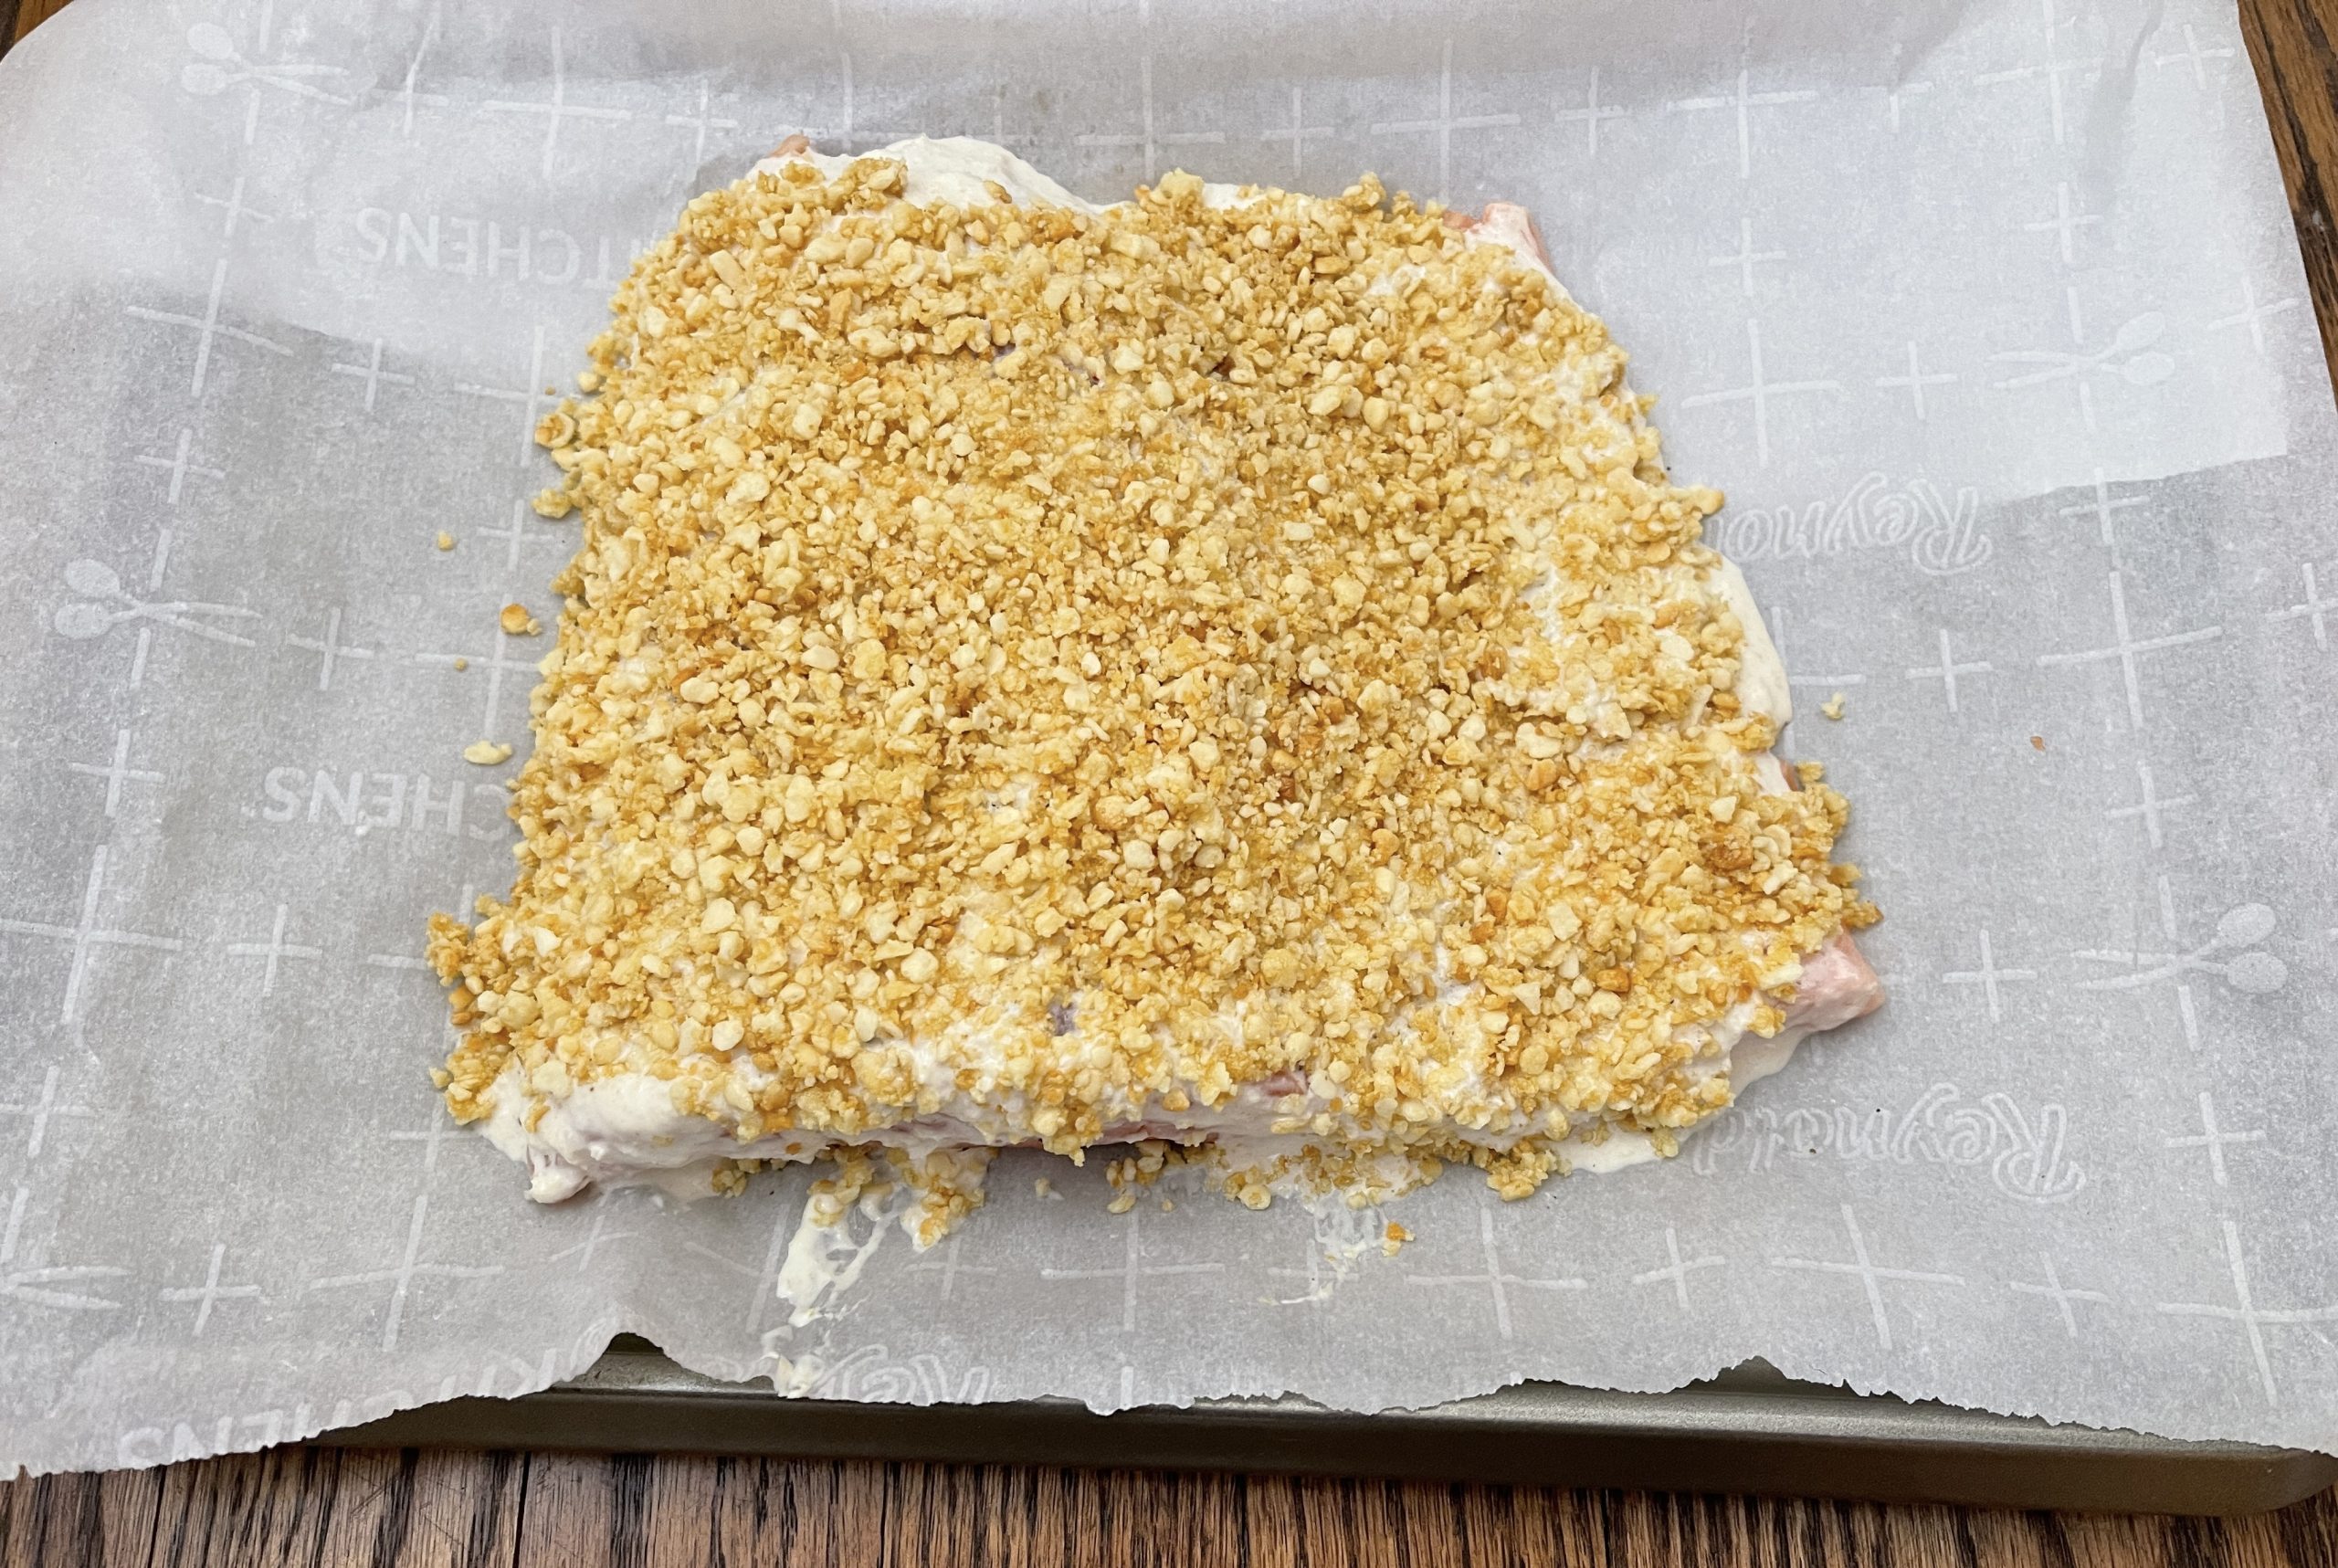 place gluten free panko on top of the horseradish mayo and gently pat down